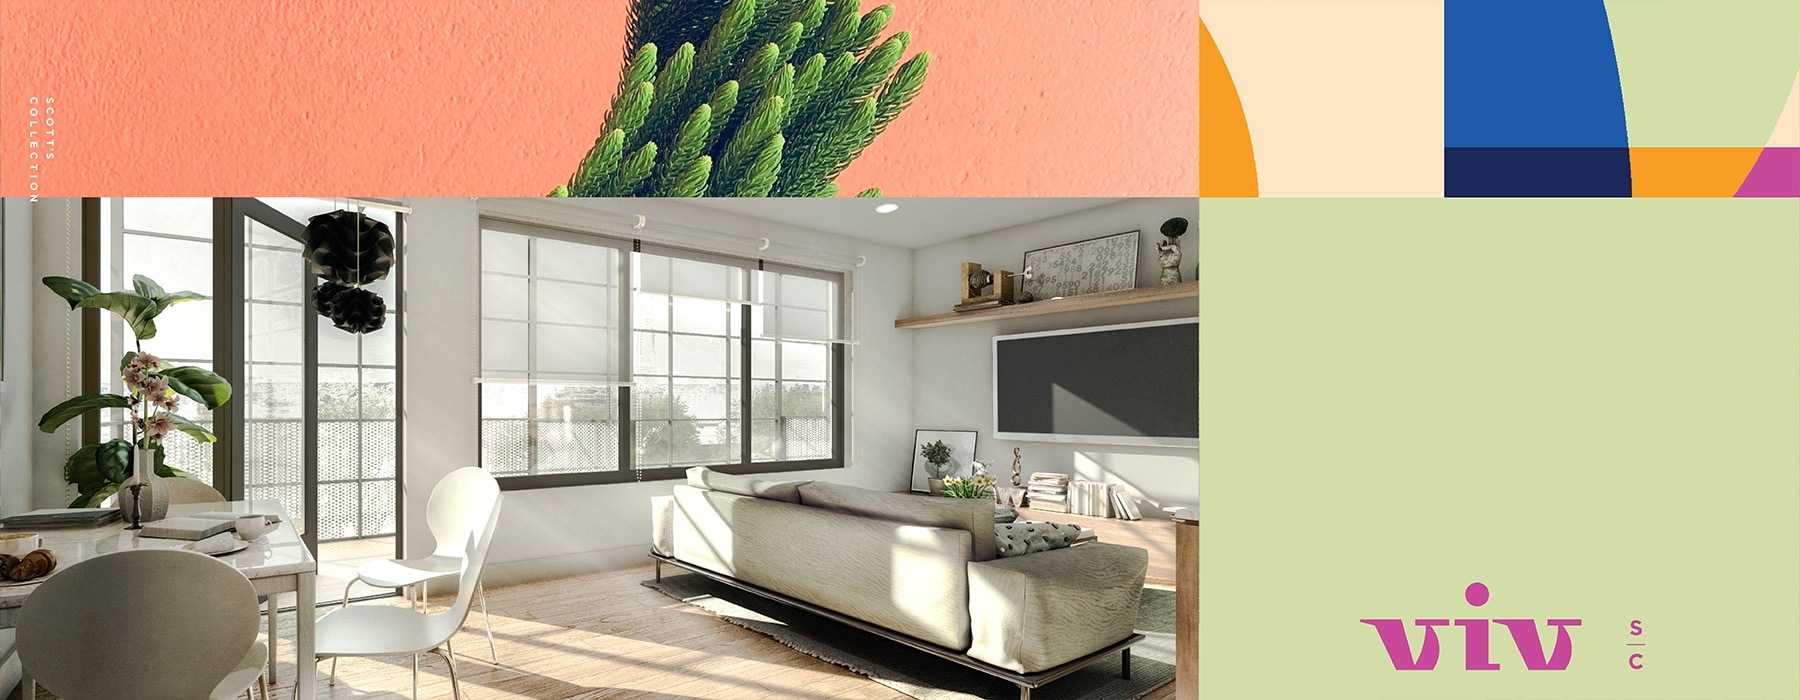 edited image showing a living room, tropical clip-art and modern colored shapes